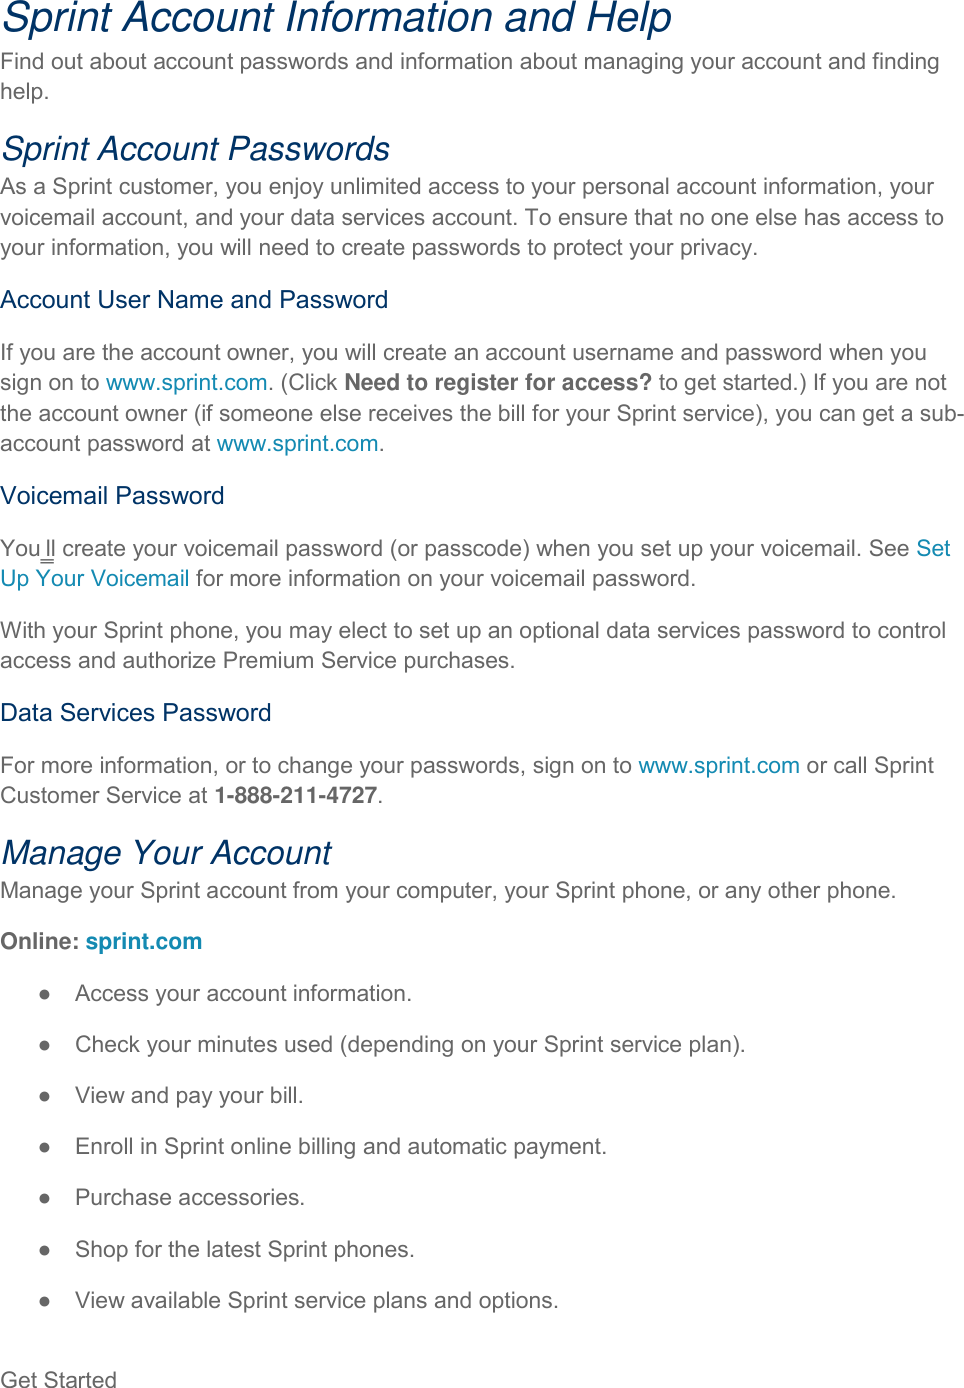 Get Started   Sprint Account Information and Help Find out about account passwords and information about managing your account and finding help. Sprint Account Passwords As a Sprint customer, you enjoy unlimited access to your personal account information, your voicemail account, and your data services account. To ensure that no one else has access to your information, you will need to create passwords to protect your privacy. Account User Name and Password If you are the account owner, you will create an account username and password when you sign on to www.sprint.com. (Click Need to register for access? to get started.) If you are not the account owner (if someone else receives the bill for your Sprint service), you can get a sub-account password at www.sprint.com. Voicemail Password You‗ll create your voicemail password (or passcode) when you set up your voicemail. See Set Up Your Voicemail for more information on your voicemail password. With your Sprint phone, you may elect to set up an optional data services password to control access and authorize Premium Service purchases. Data Services Password For more information, or to change your passwords, sign on to www.sprint.com or call Sprint Customer Service at 1-888-211-4727. Manage Your Account Manage your Sprint account from your computer, your Sprint phone, or any other phone. Online: sprint.com ●  Access your account information. ●  Check your minutes used (depending on your Sprint service plan). ●  View and pay your bill. ●  Enroll in Sprint online billing and automatic payment. ●  Purchase accessories. ●  Shop for the latest Sprint phones. ●  View available Sprint service plans and options. 